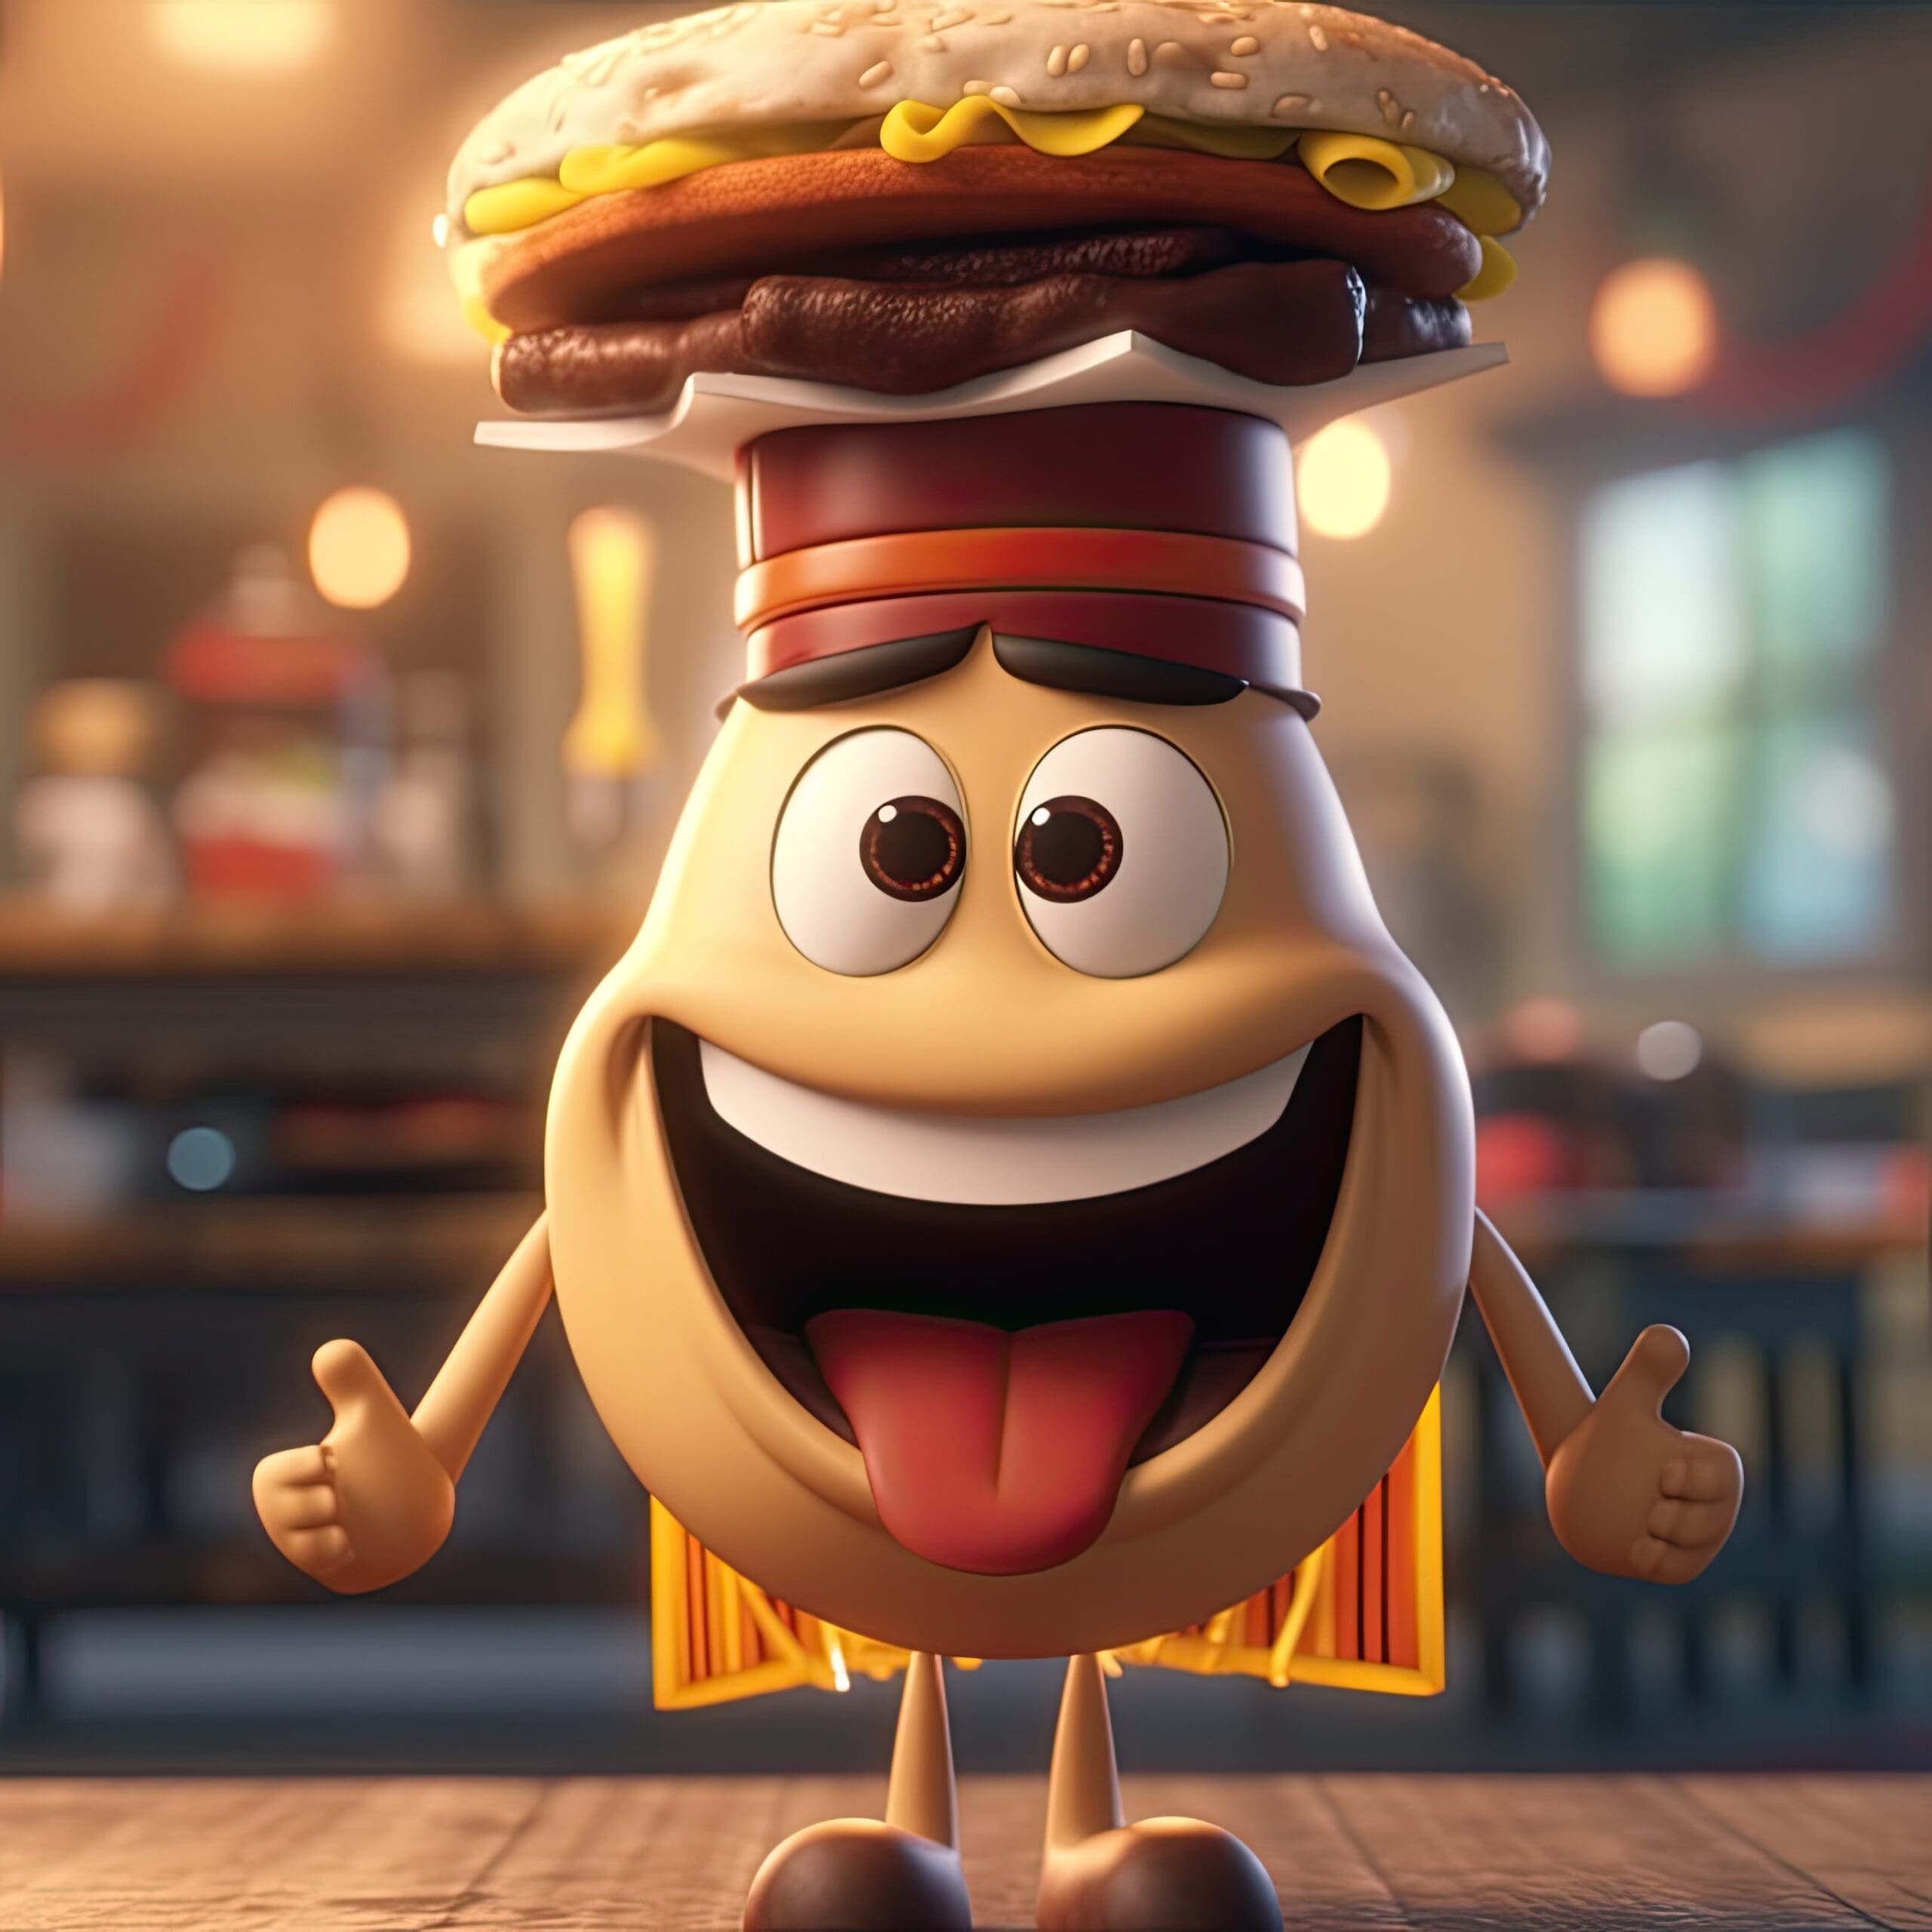 Cartoon graphic of a happy burger with a chef’s hat and a grin on a grill-themed background.